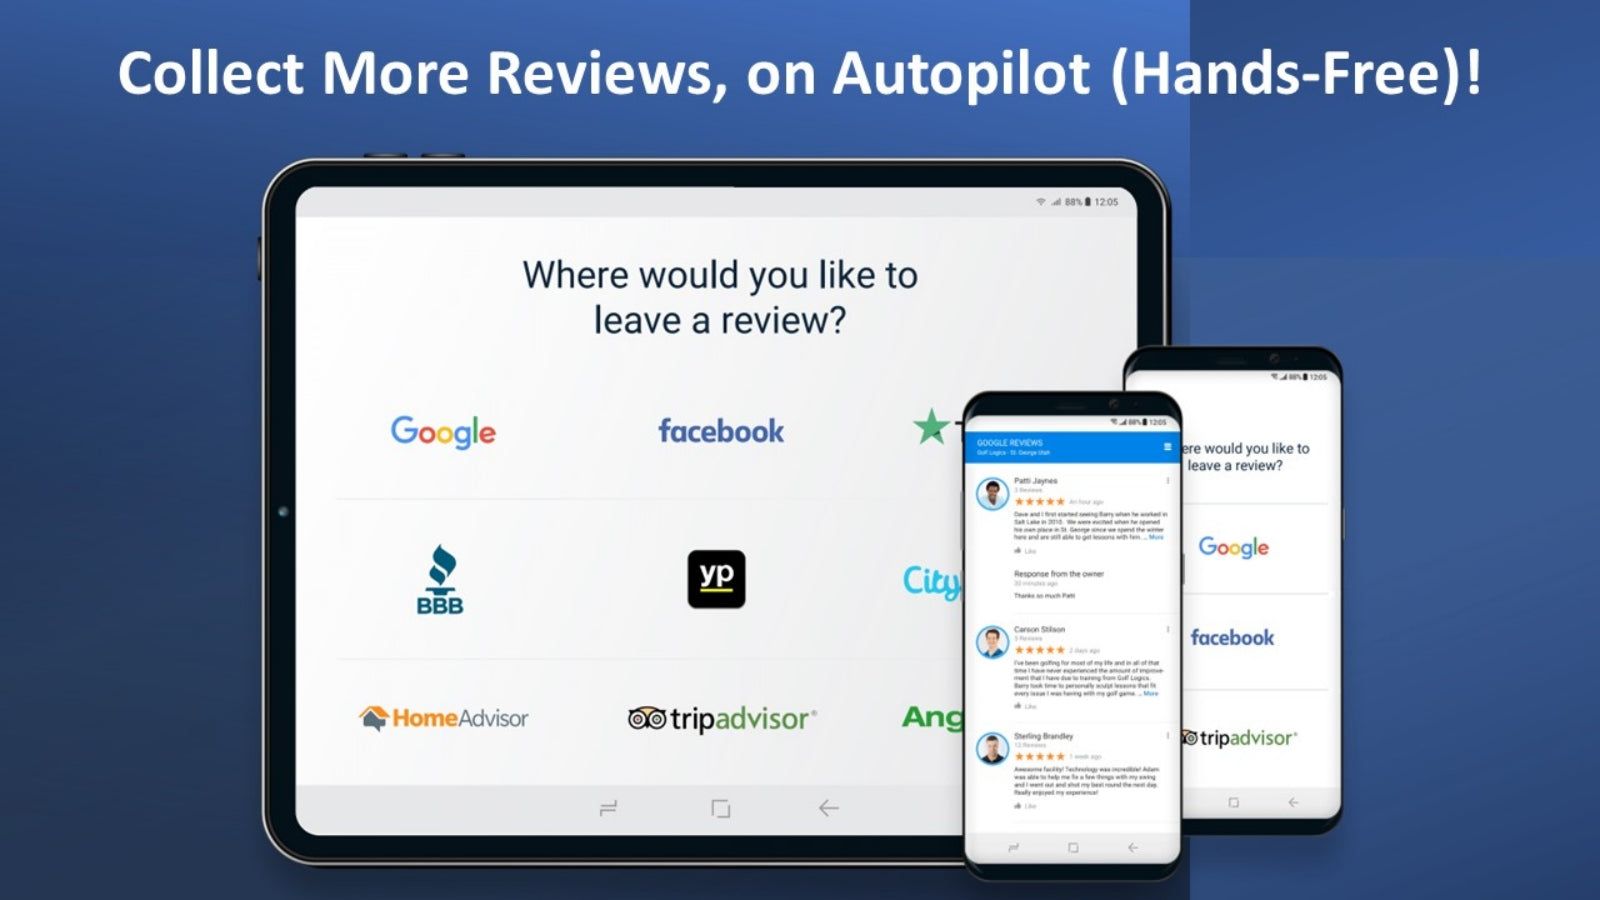 Collect More Reviews on Autopilot (Hands-Free)